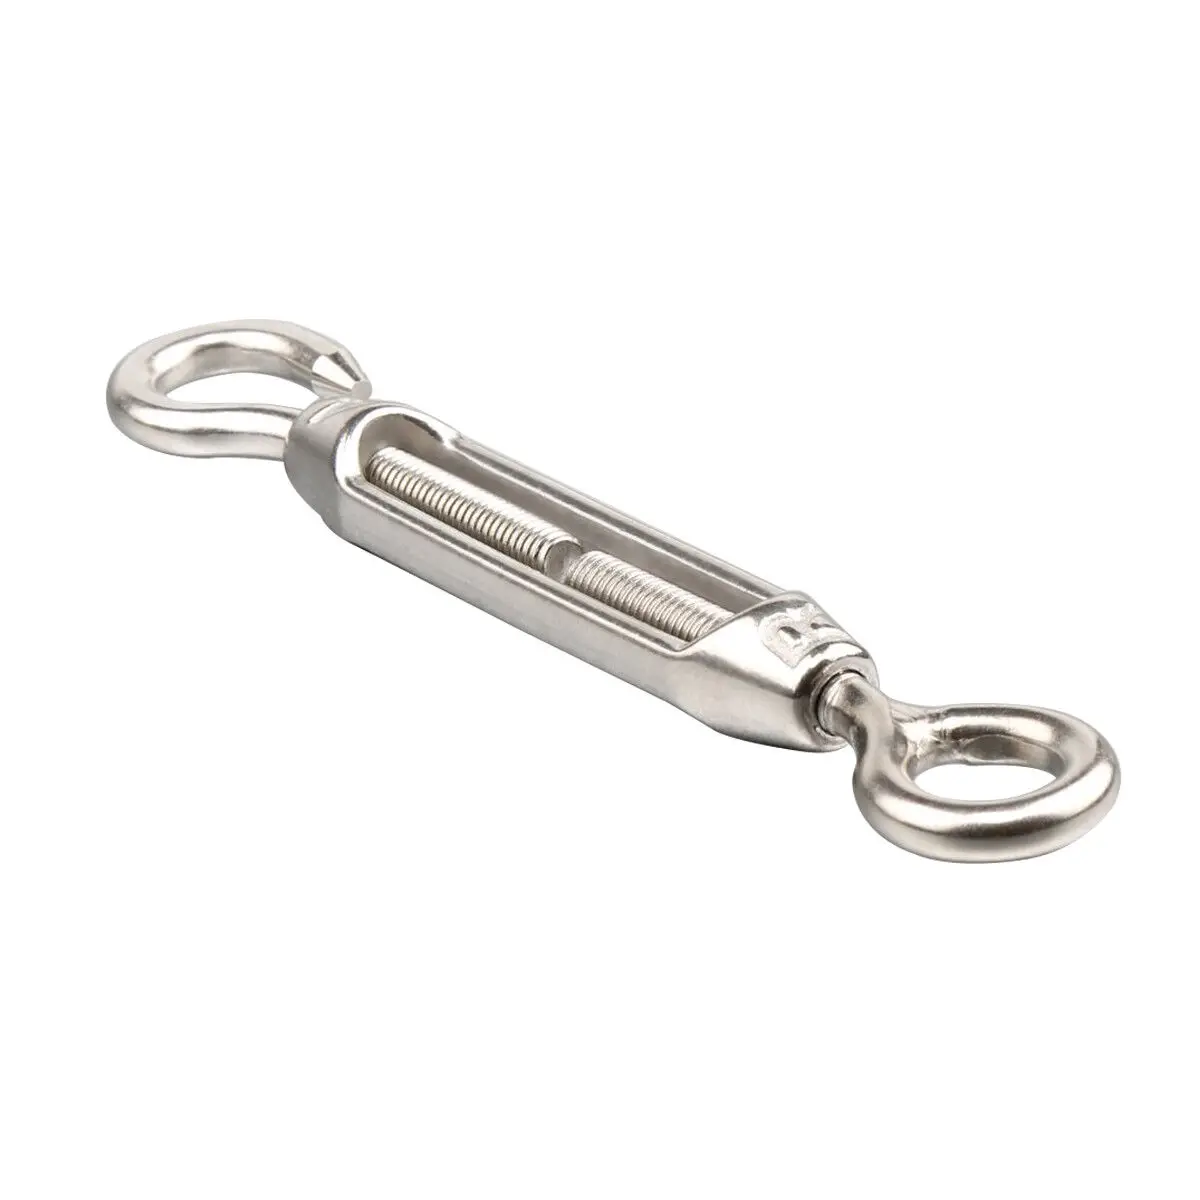 Turnbuckle Wire Tensioner Strainer Stainless Steel Hook and Rope Cable Tension